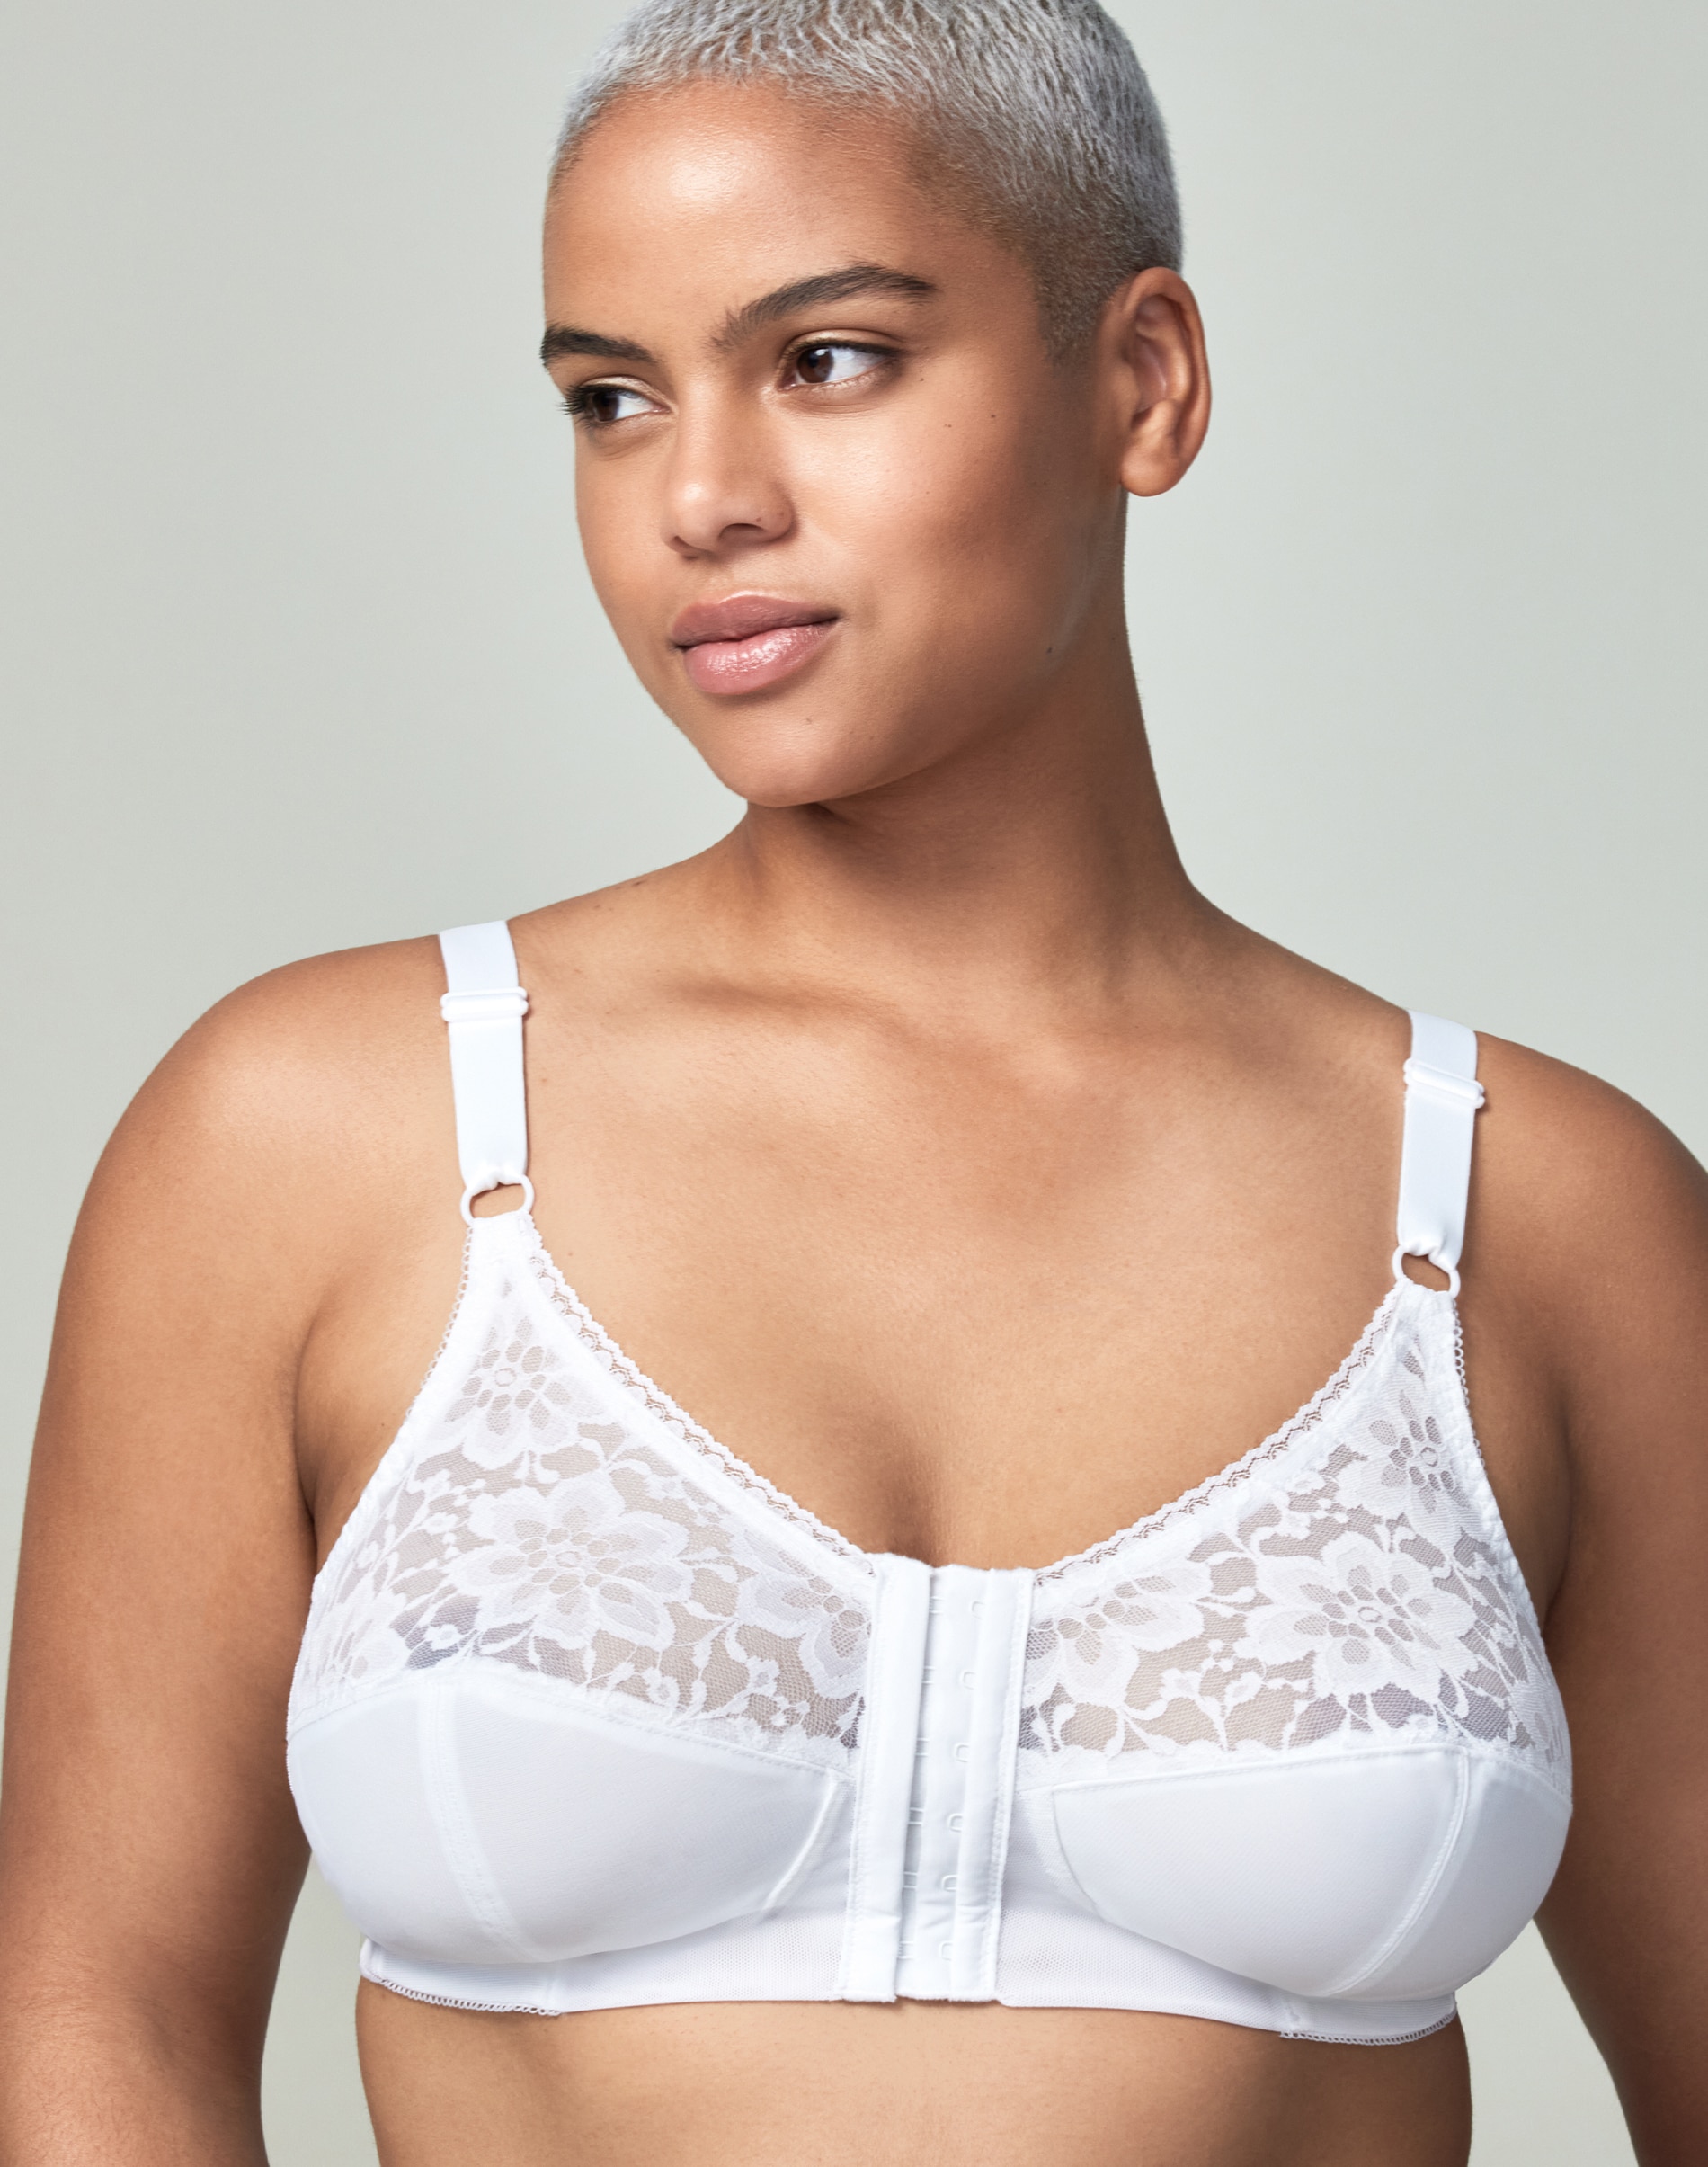 Easy pieces Plus Size Bras for Women, Comfort Wireless Bras with Support  and Lift, Front Closure Bras for Women Plus Size, Beige, XX-Large at   Women's Clothing store